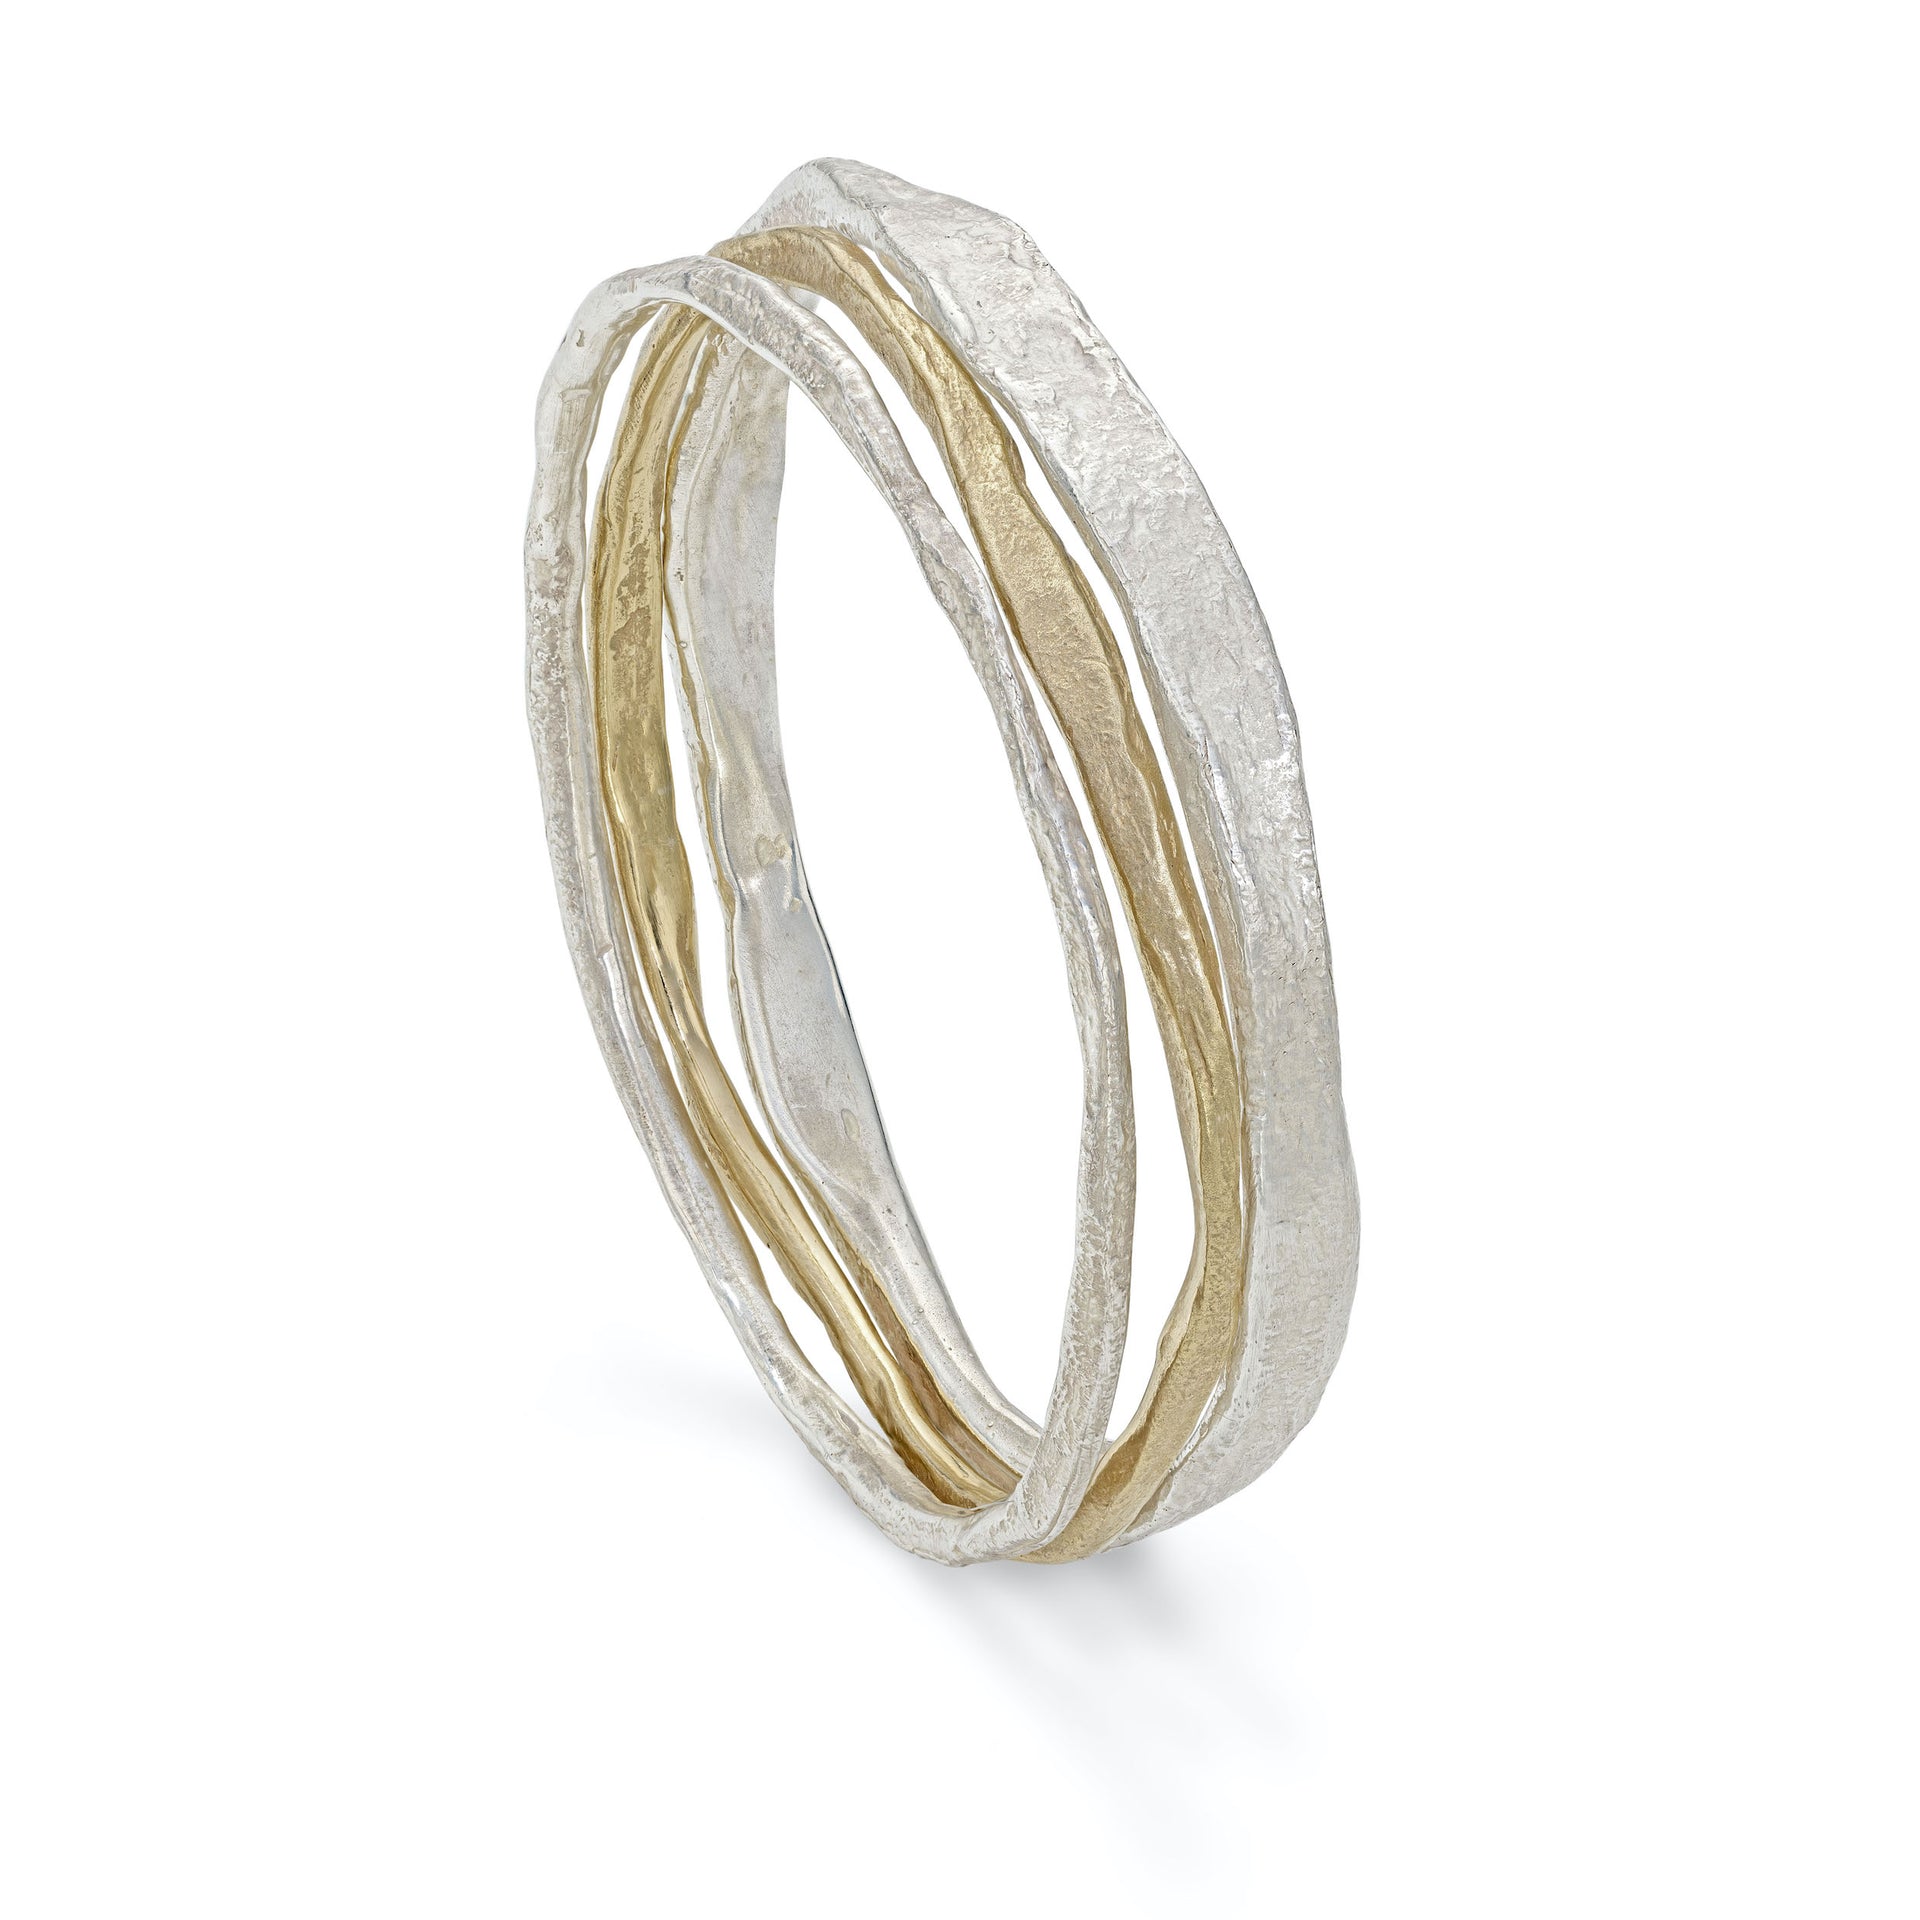 Stacking bangles in solid silver and gold. Chunky, irregular bangles in uneven widths have an organic texture and coastal character. Made in Cornwall.  